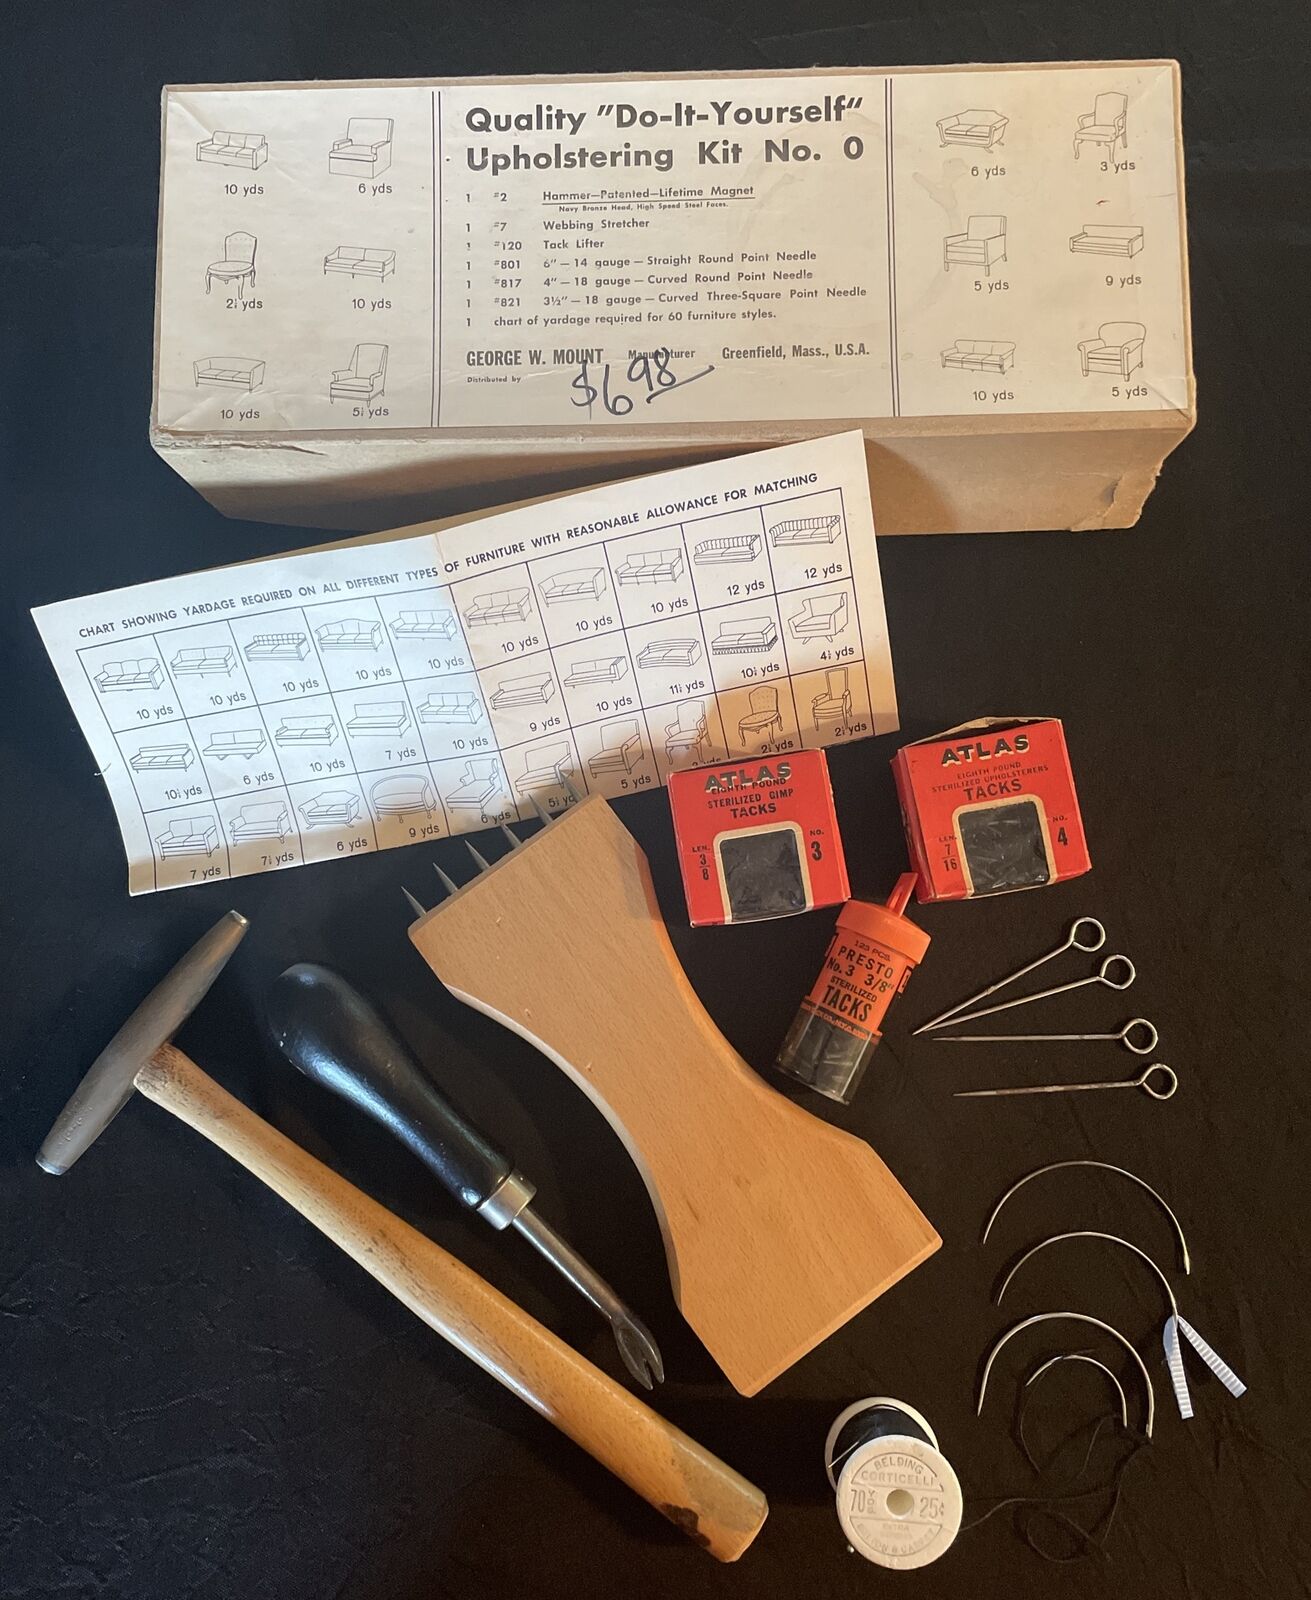 Vintage George W Mount Greenfield, Mass. Upholstering Kit In Box w/#2 Hammer